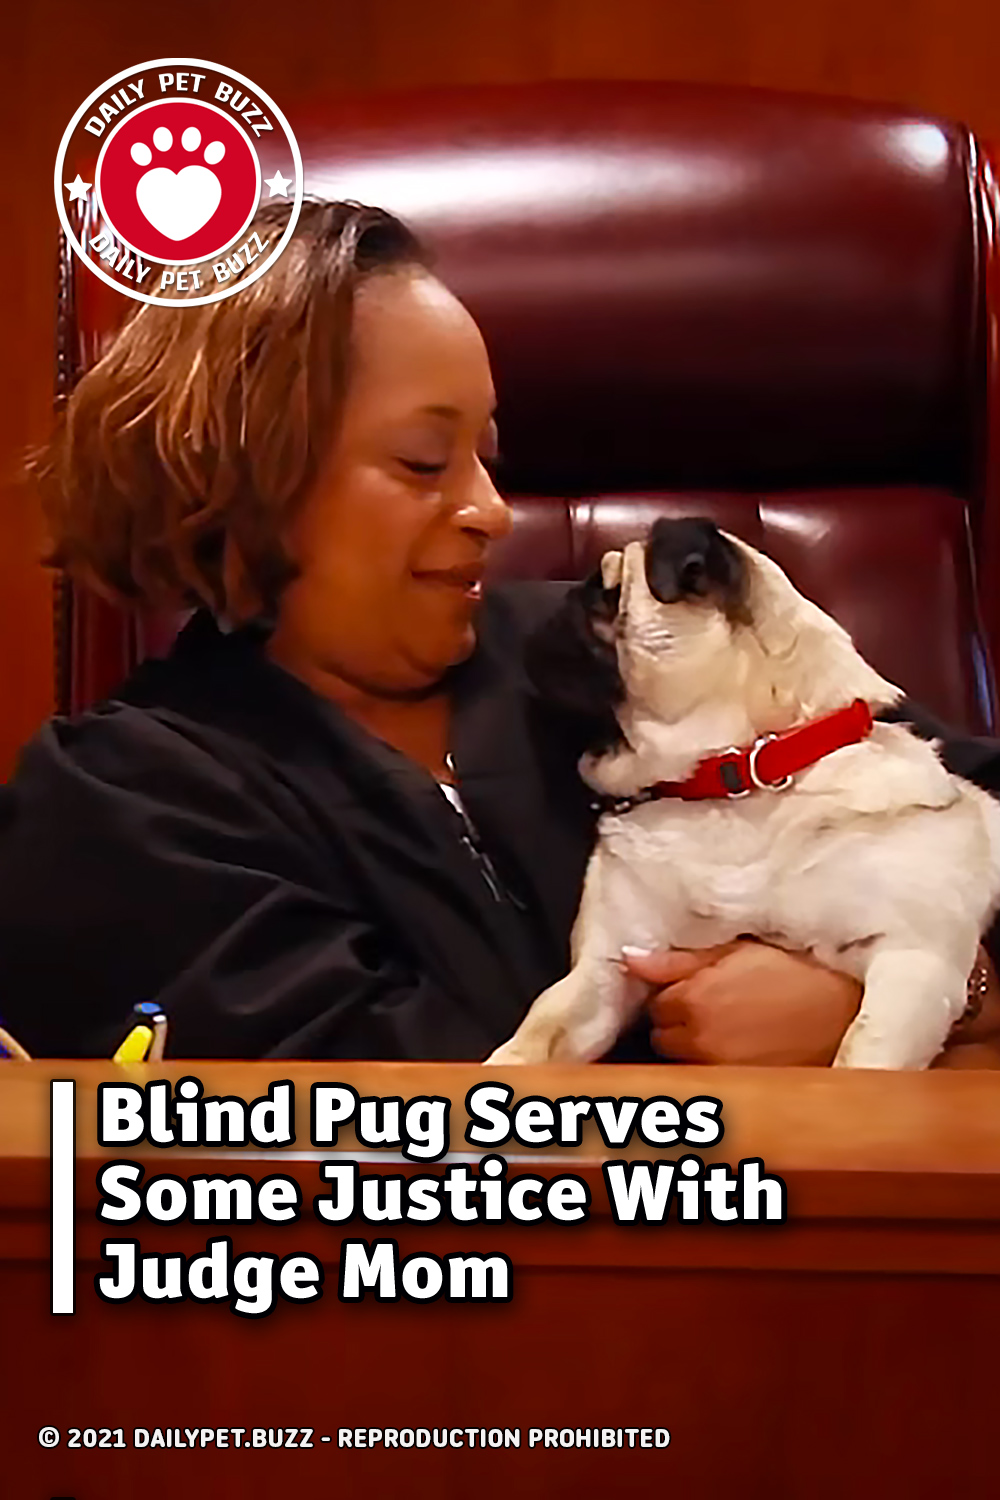 Blind Pug Serves Some Justice With Judge Mom